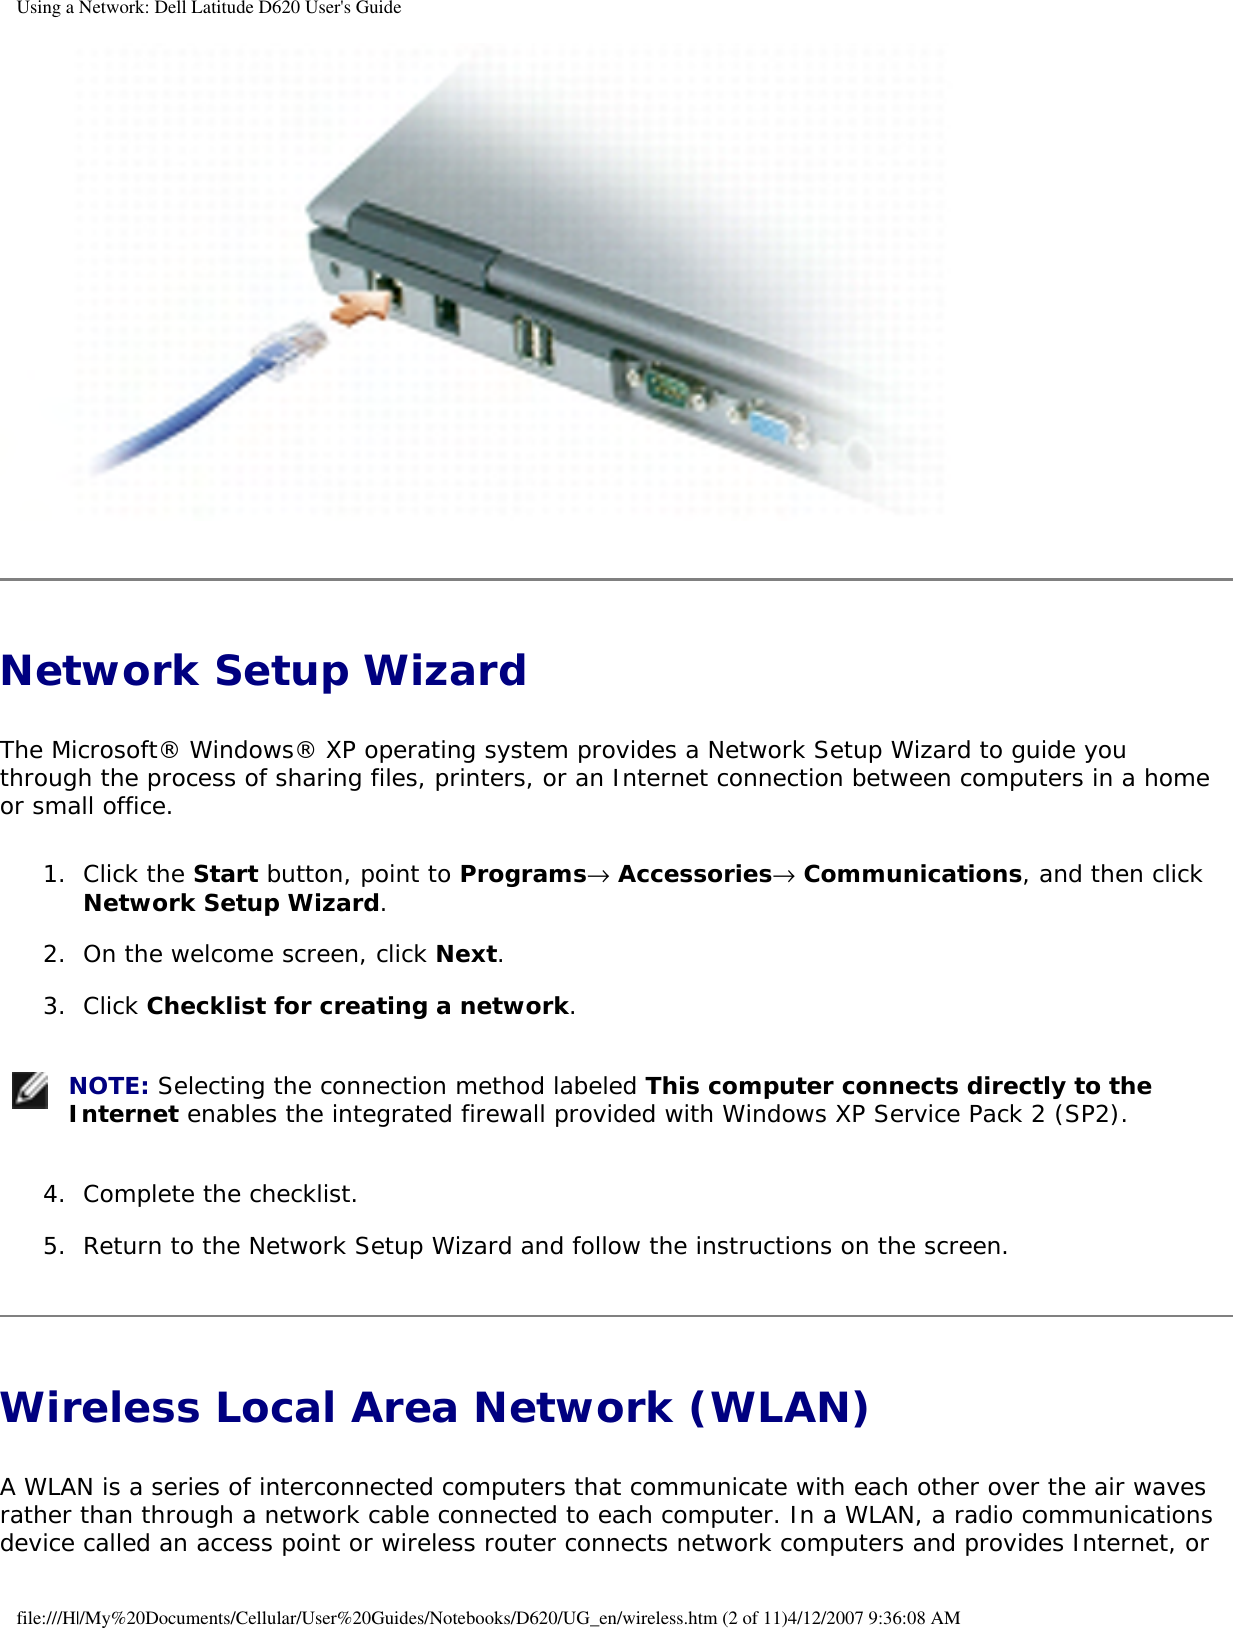 Using a Network: Dell Latitude D620 User&apos;s Guide Network Setup Wizard The Microsoft® Windows® XP operating system provides a Network Setup Wizard to guide you through the process of sharing files, printers, or an Internet connection between computers in a home or small office.1.  Click the Start button, point to Programs→ Accessories→ Communications, and then click Network Setup Wizard.   2.  On the welcome screen, click Next.   3.  Click Checklist for creating a network.    NOTE: Selecting the connection method labeled This computer connects directly to the Internet enables the integrated firewall provided with Windows XP Service Pack 2 (SP2).4.  Complete the checklist.   5.  Return to the Network Setup Wizard and follow the instructions on the screen.   Wireless Local Area Network (WLAN) A WLAN is a series of interconnected computers that communicate with each other over the air waves rather than through a network cable connected to each computer. In a WLAN, a radio communications device called an access point or wireless router connects network computers and provides Internet, or file:///H|/My%20Documents/Cellular/User%20Guides/Notebooks/D620/UG_en/wireless.htm (2 of 11)4/12/2007 9:36:08 AM